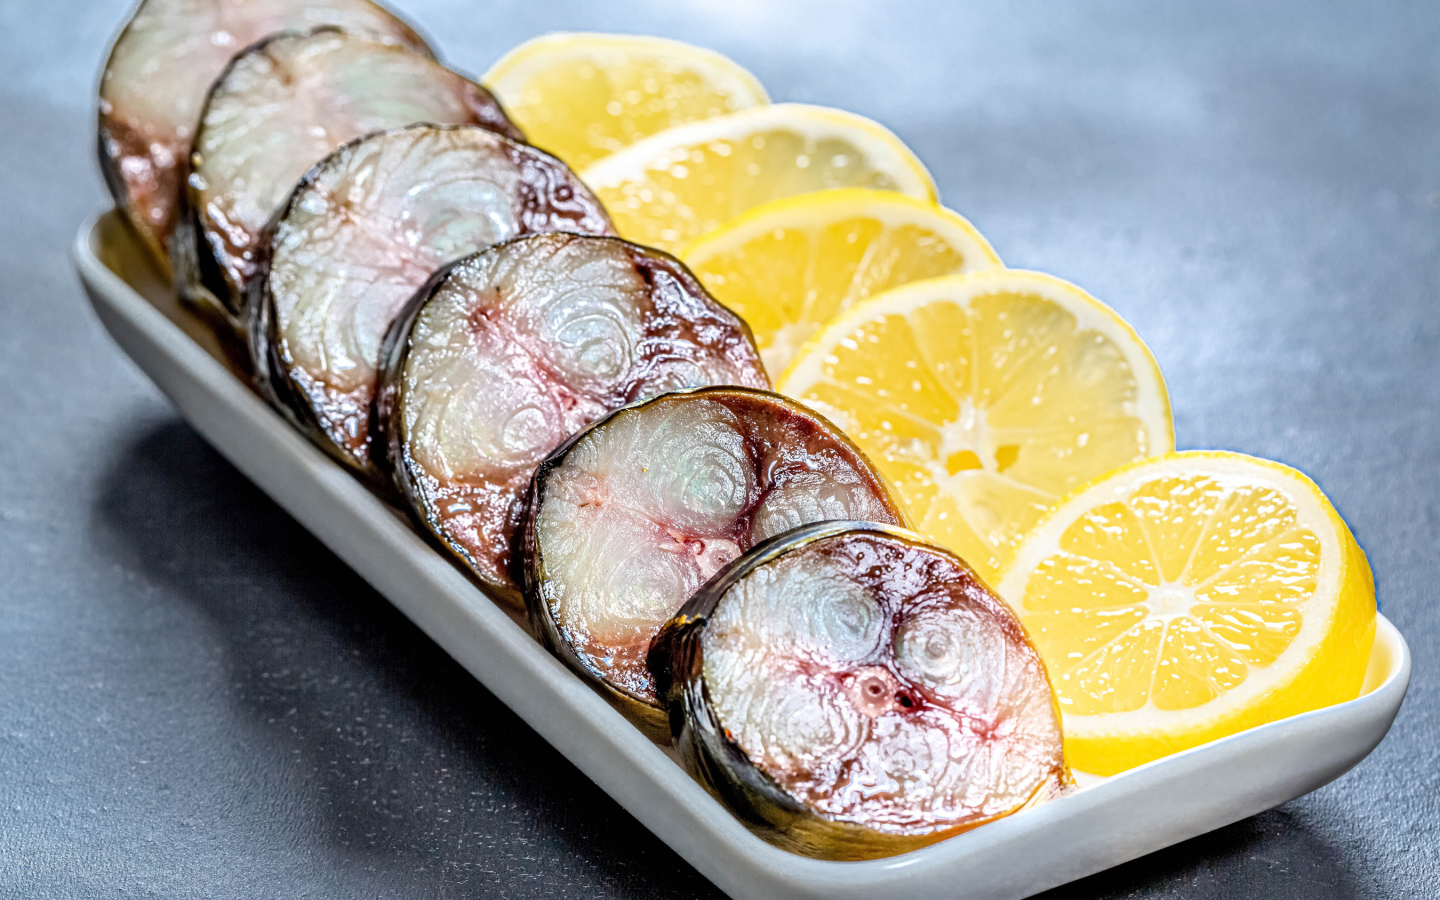 Sliced mackerel in a plate with slices of lemon